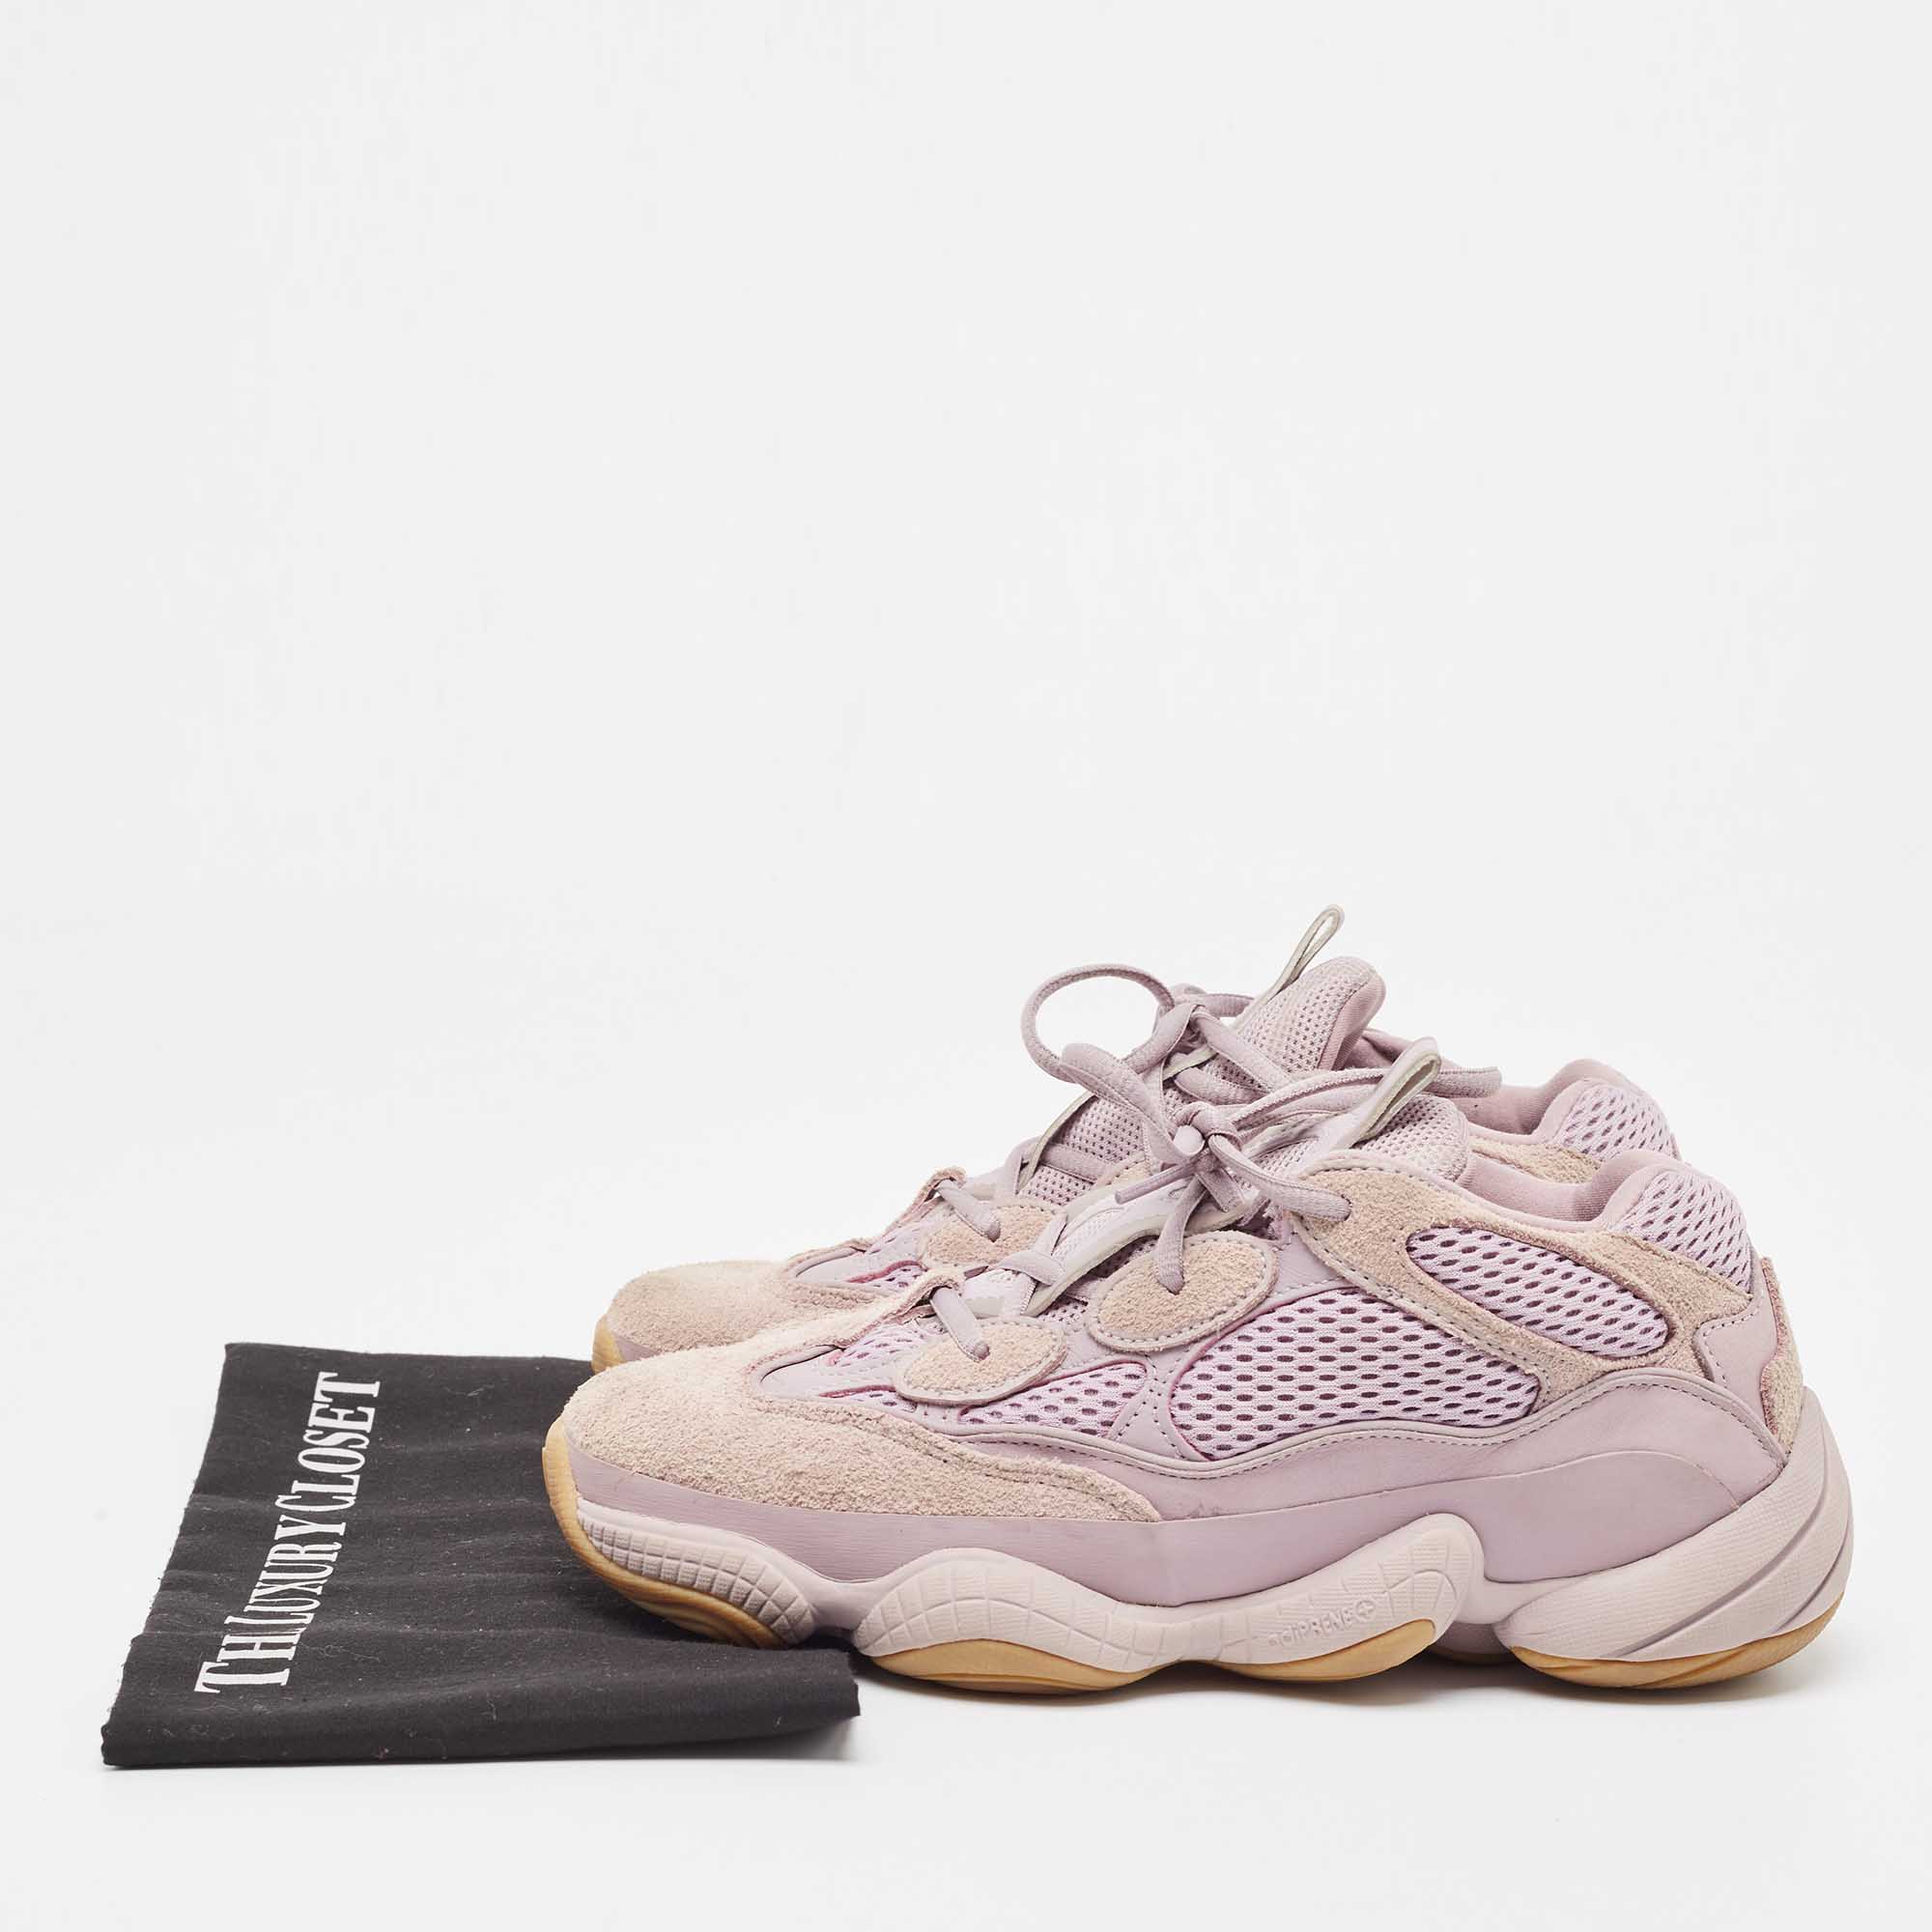 Adidas X Yeezy Purple Mesh And Suede Boost Yeezy 500 Soft Vision Sneakers Size 39.5